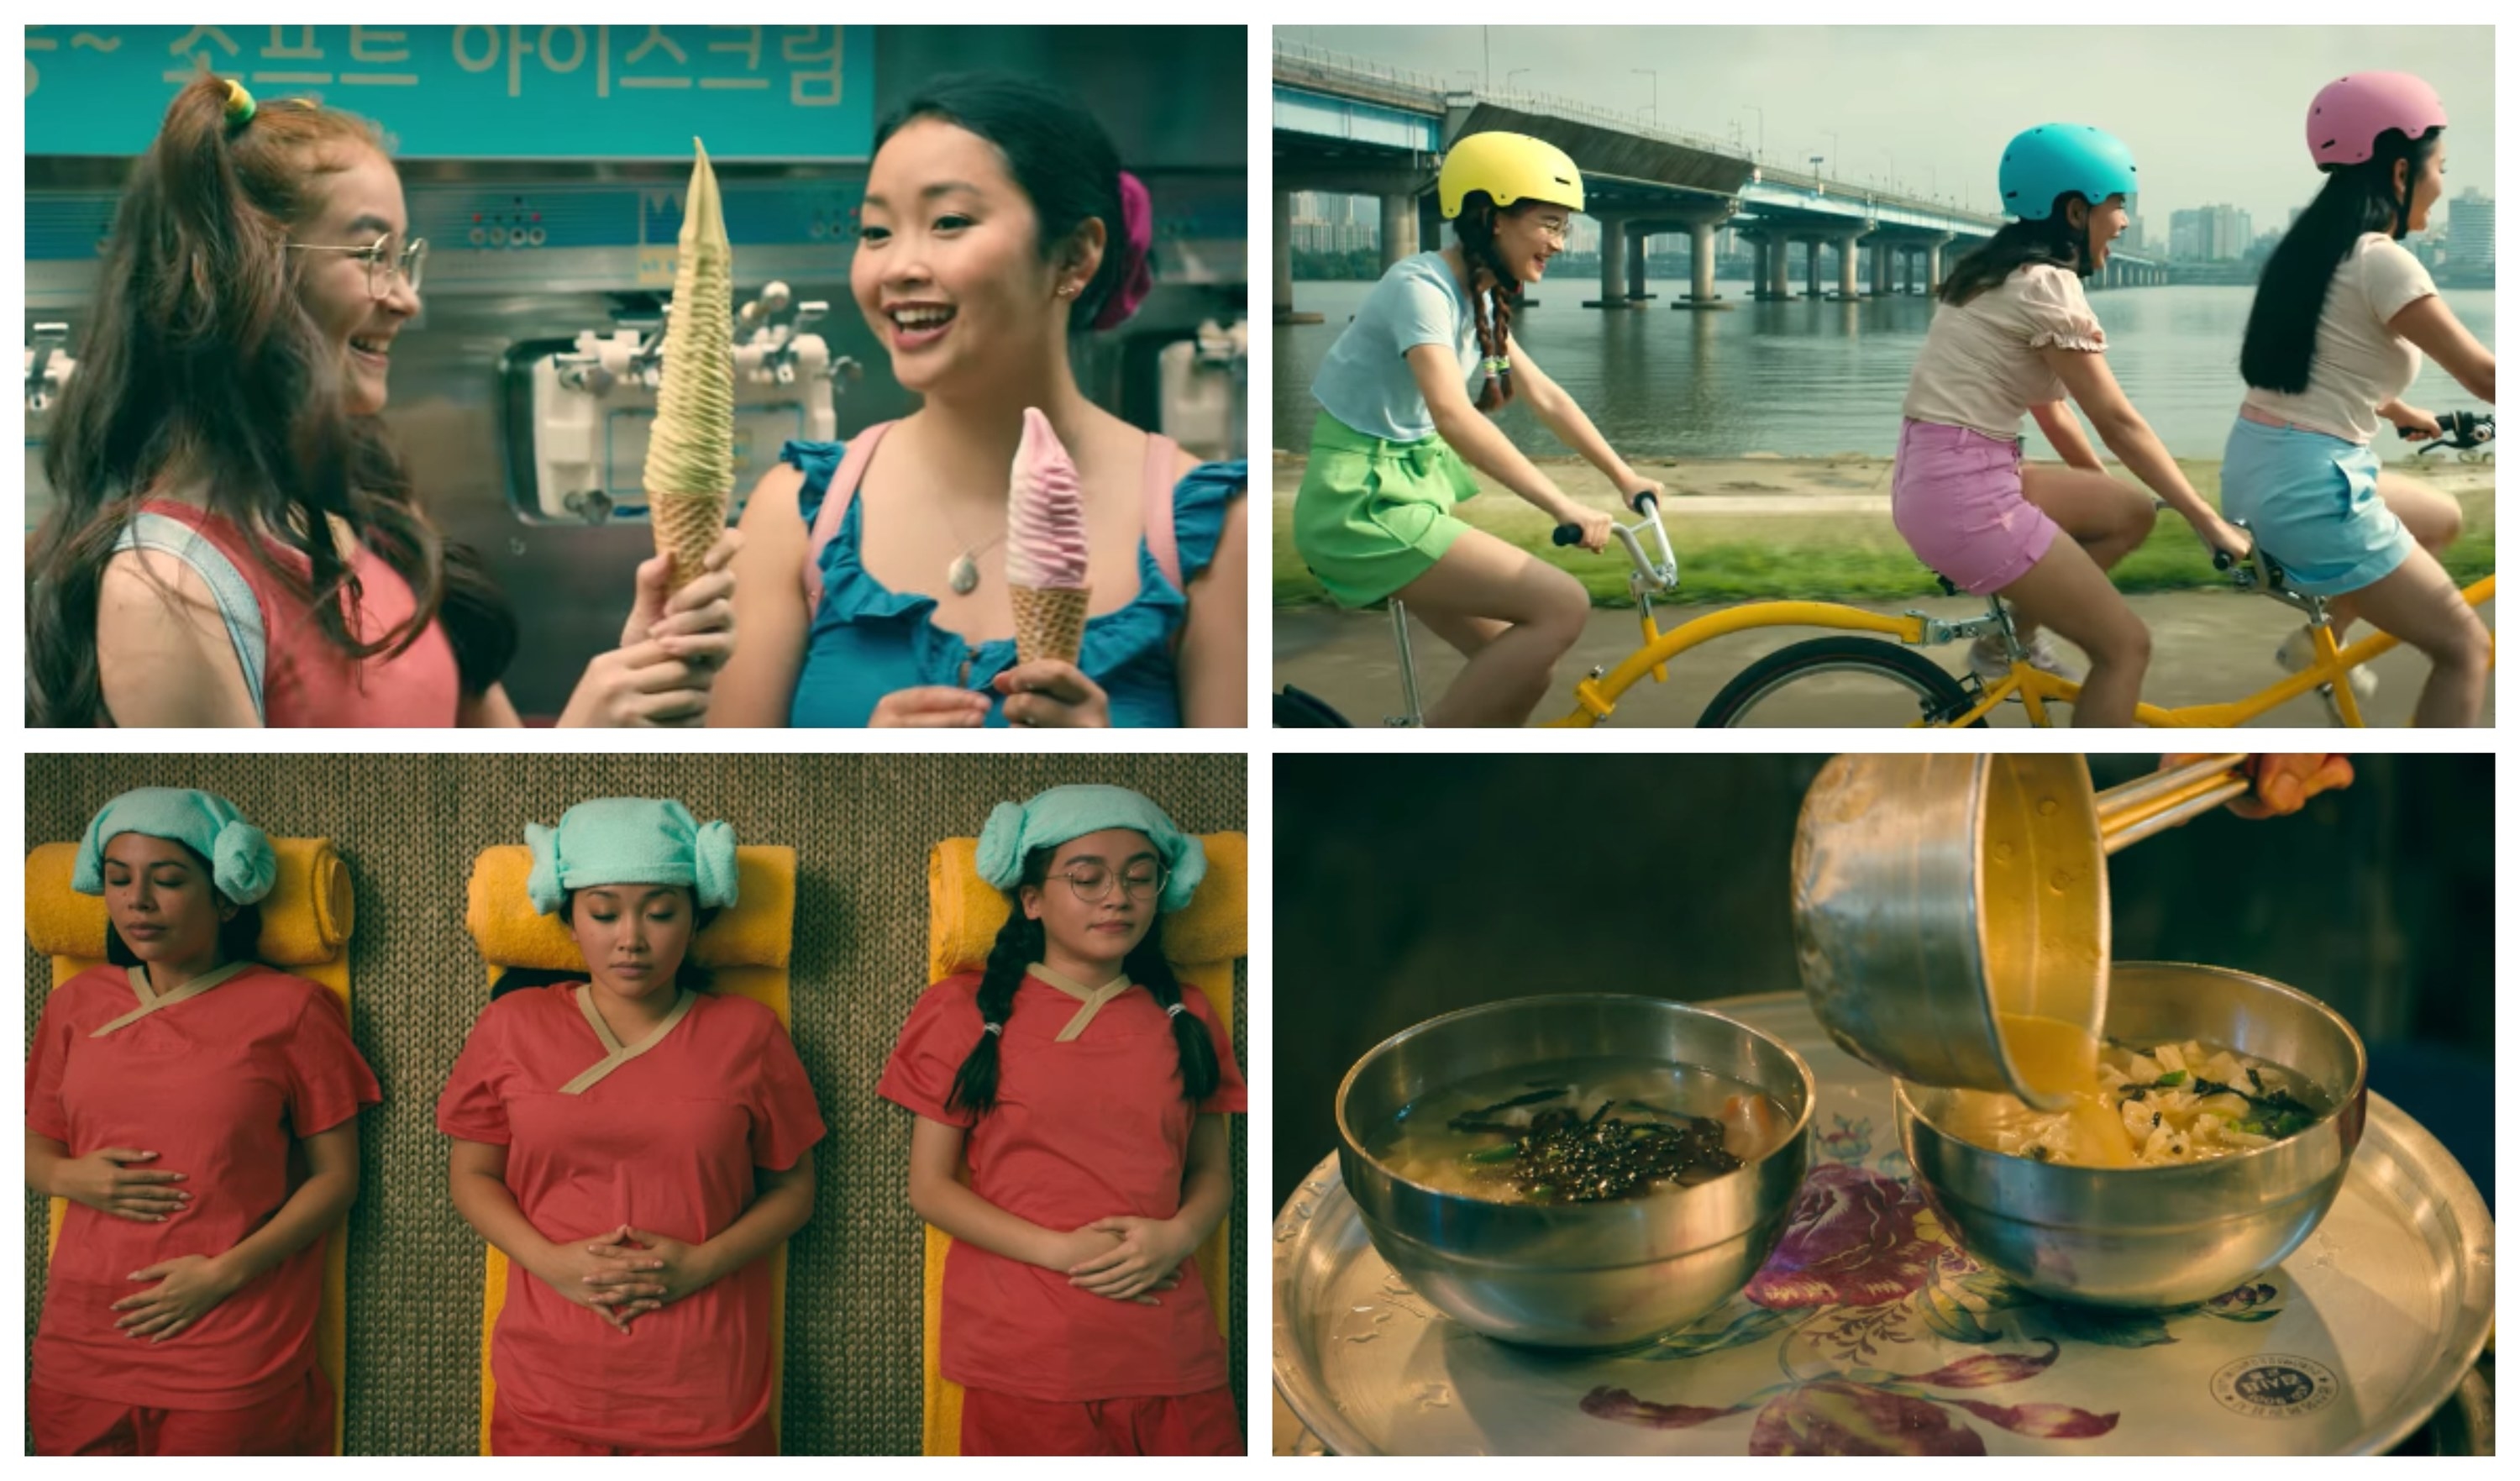 A collage of photos showing the Song sisters eating ice cream and dumplings, while also riding on a tandem bike and getting a massage